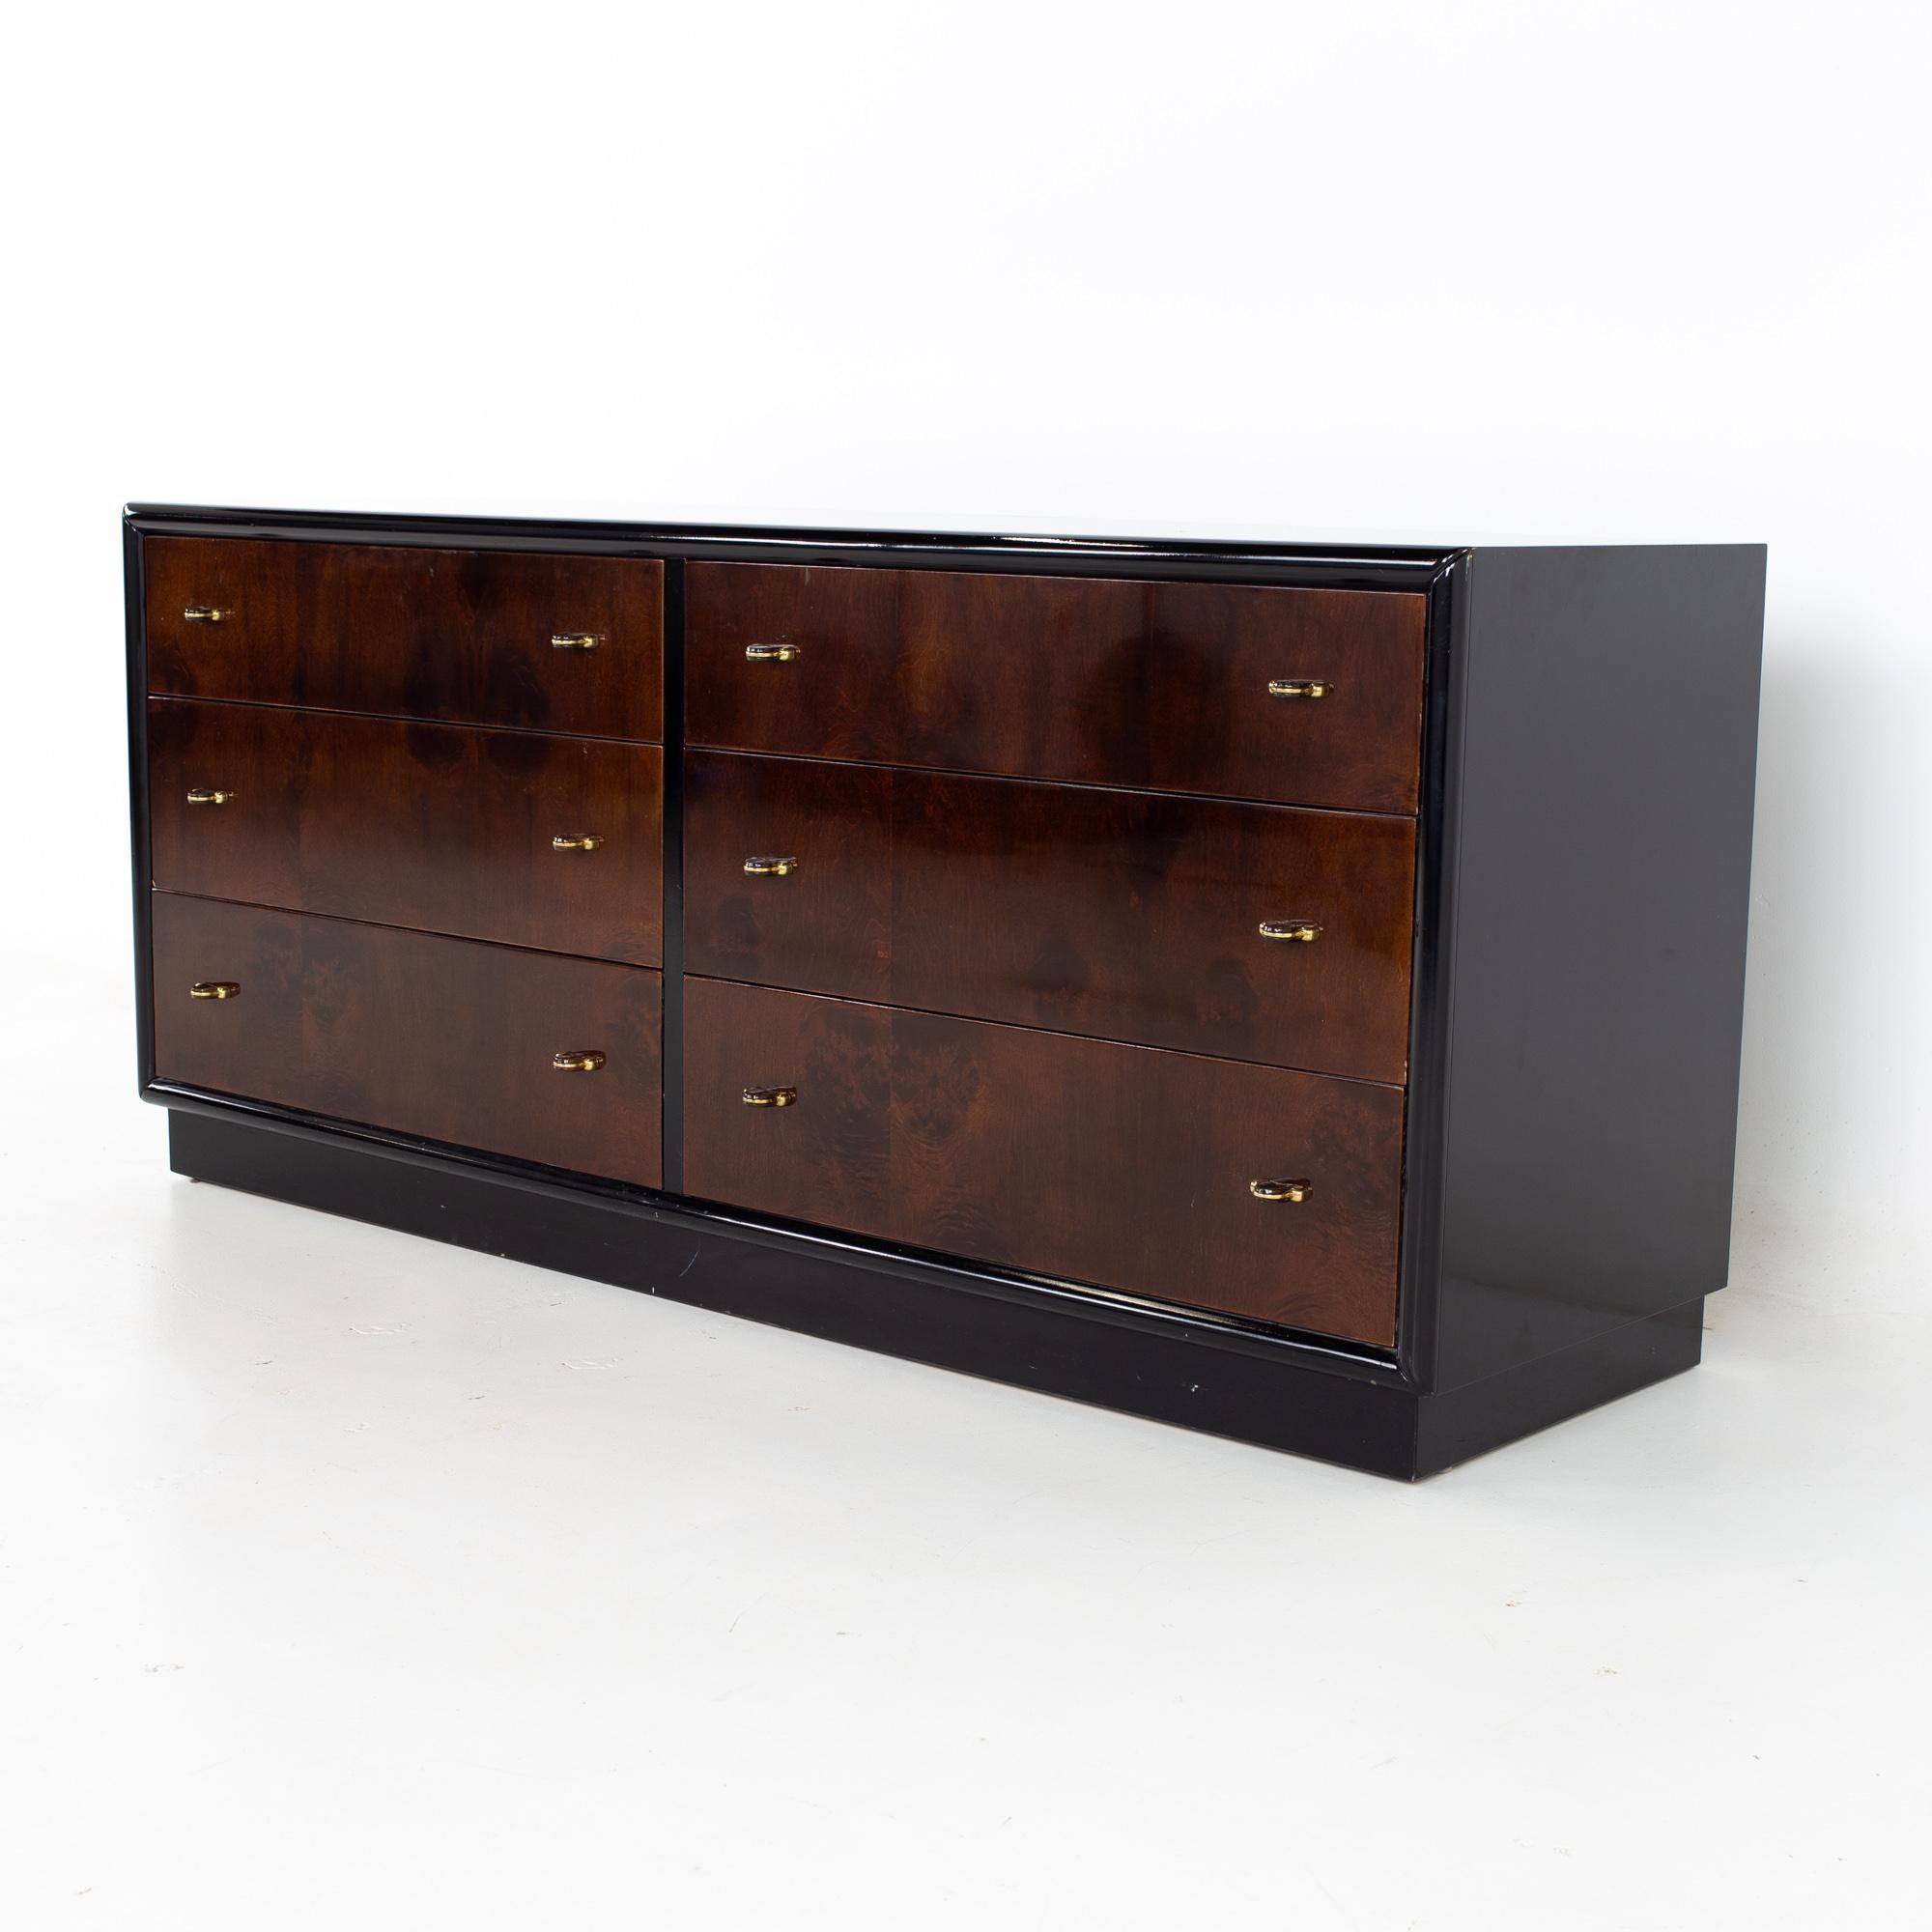 Henredon scene three midcentury walnut and brass ebonized 6 drawer lowboy dresser
Dresser measures: 64 wide x 19 deep x 28 inches high

All pieces of furniture can be had in what we call restored vintage condition. That means the piece is